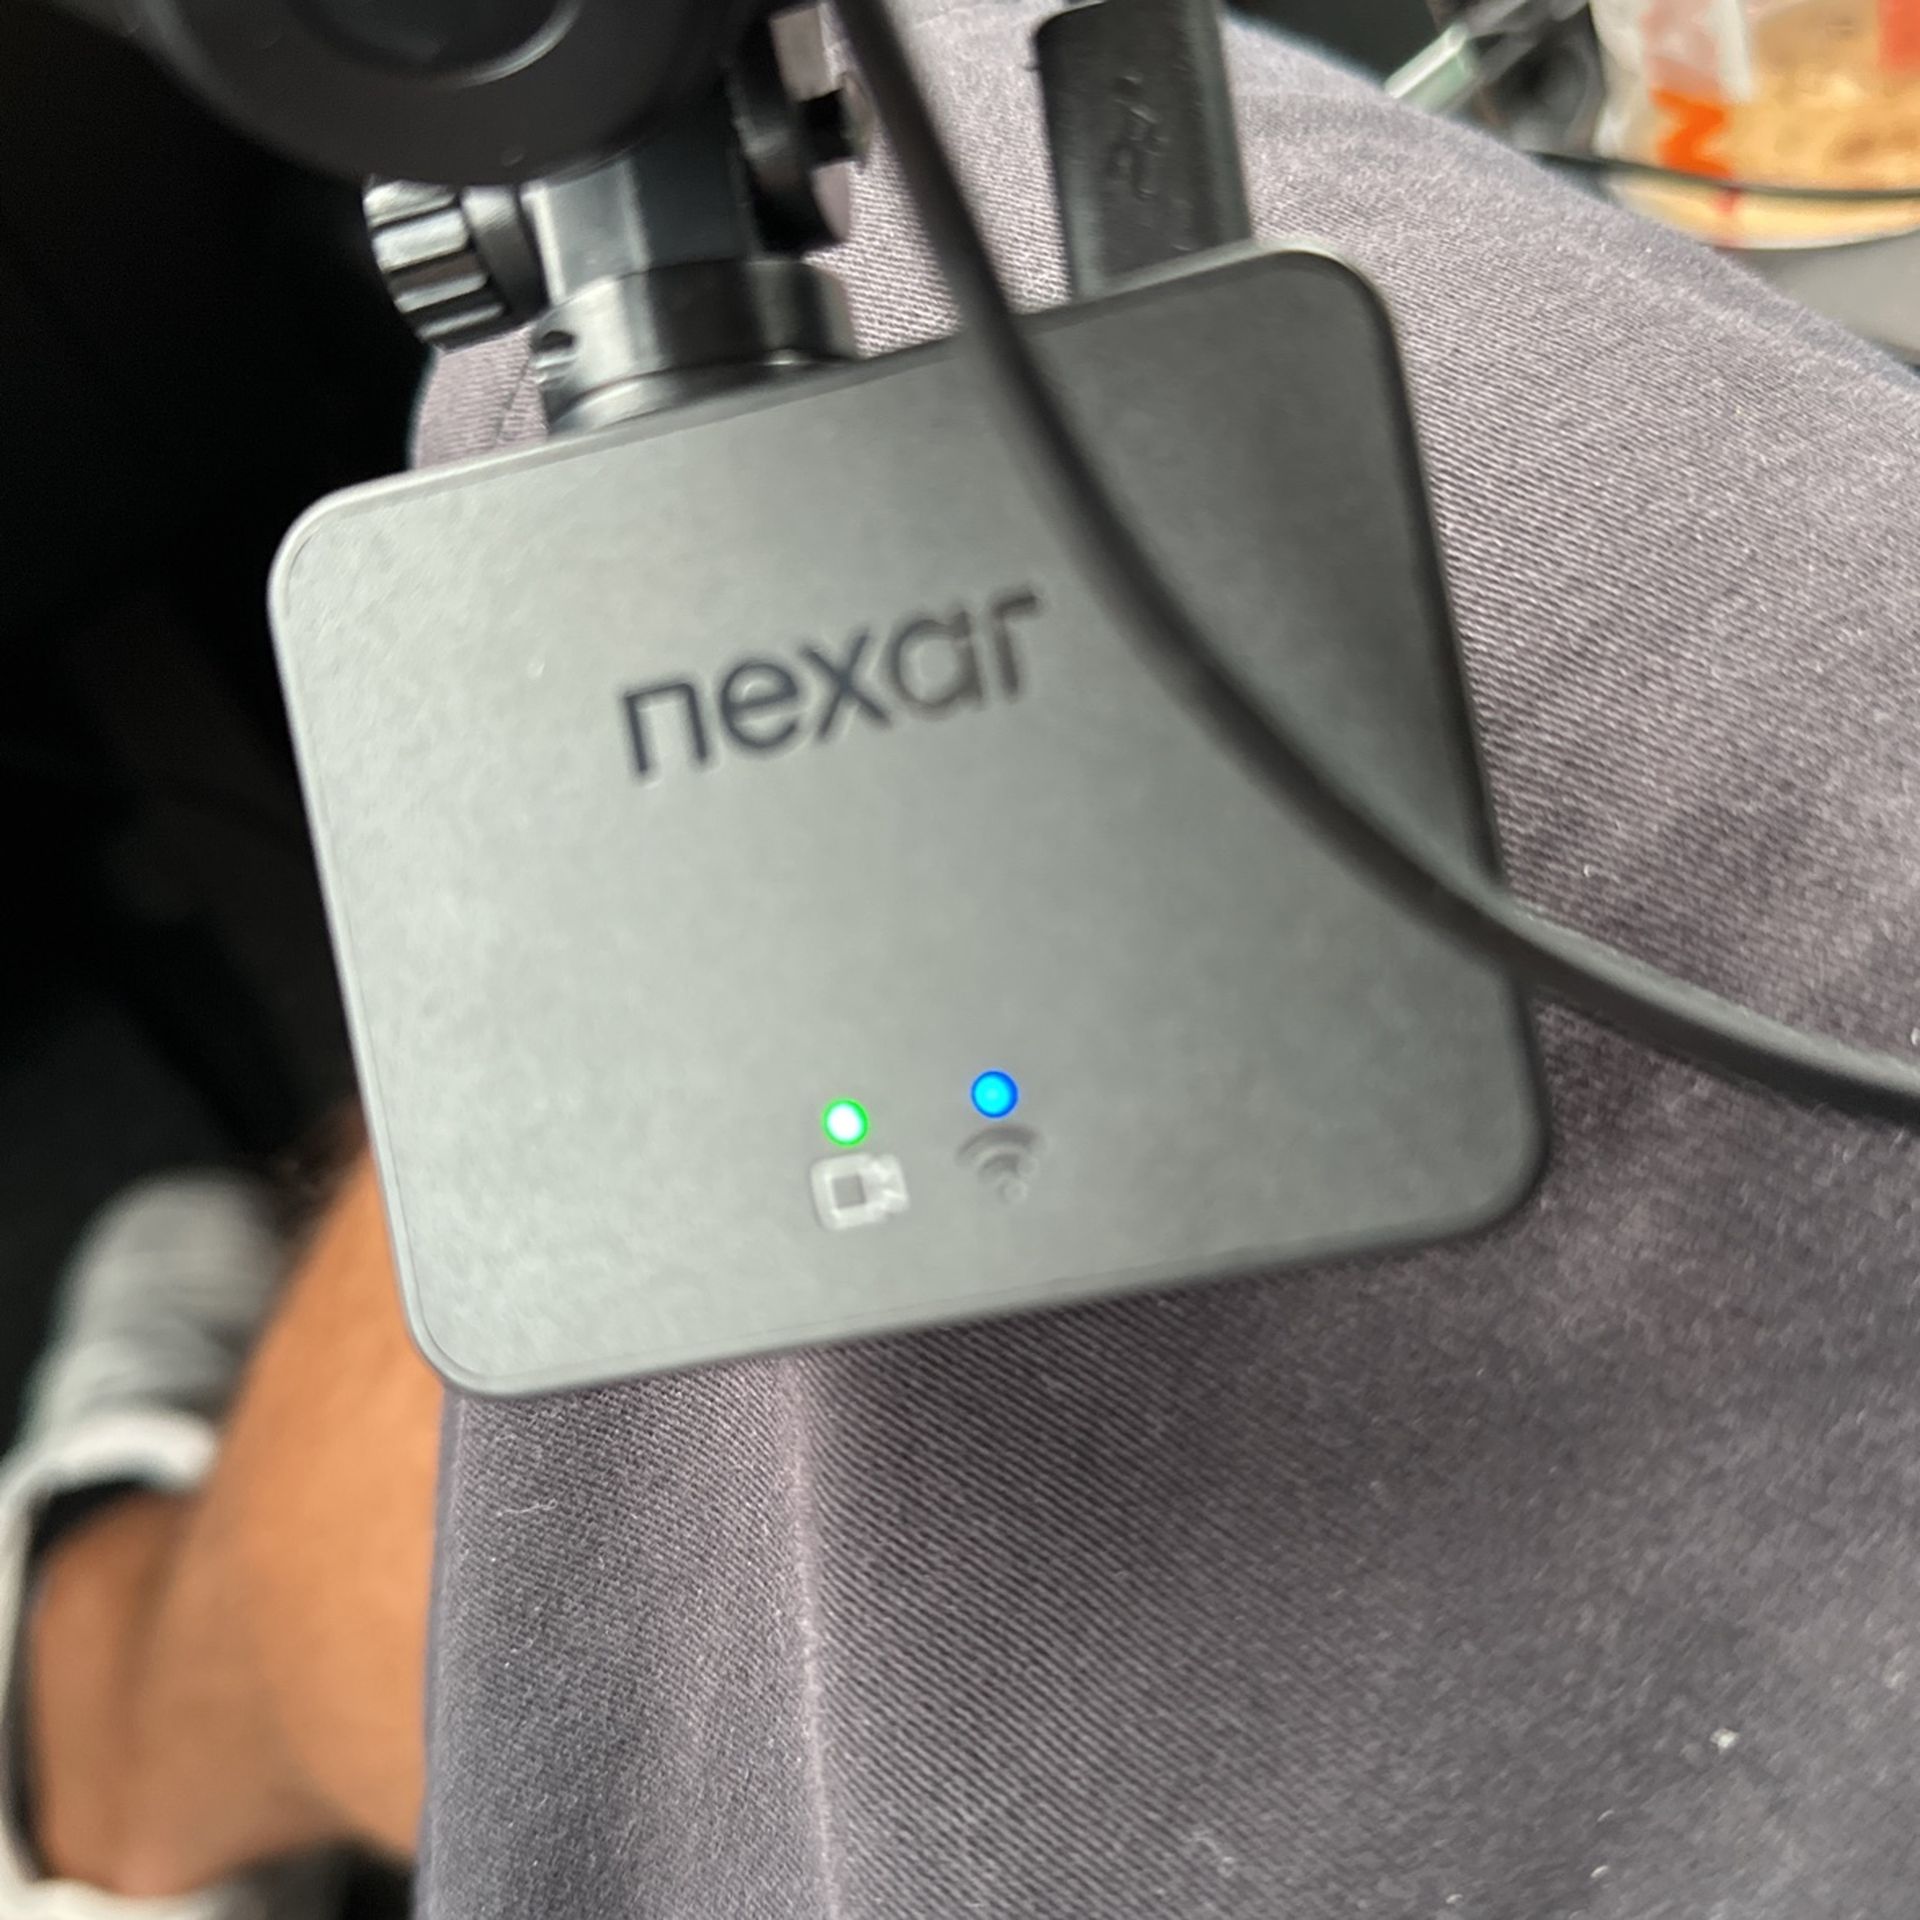 Nexar Beam GPS Dash Cam 1080p Full HD @ 30 FPS Wi-Fi, Built-in G-sensor for  Sale in New Rochelle, NY - OfferUp